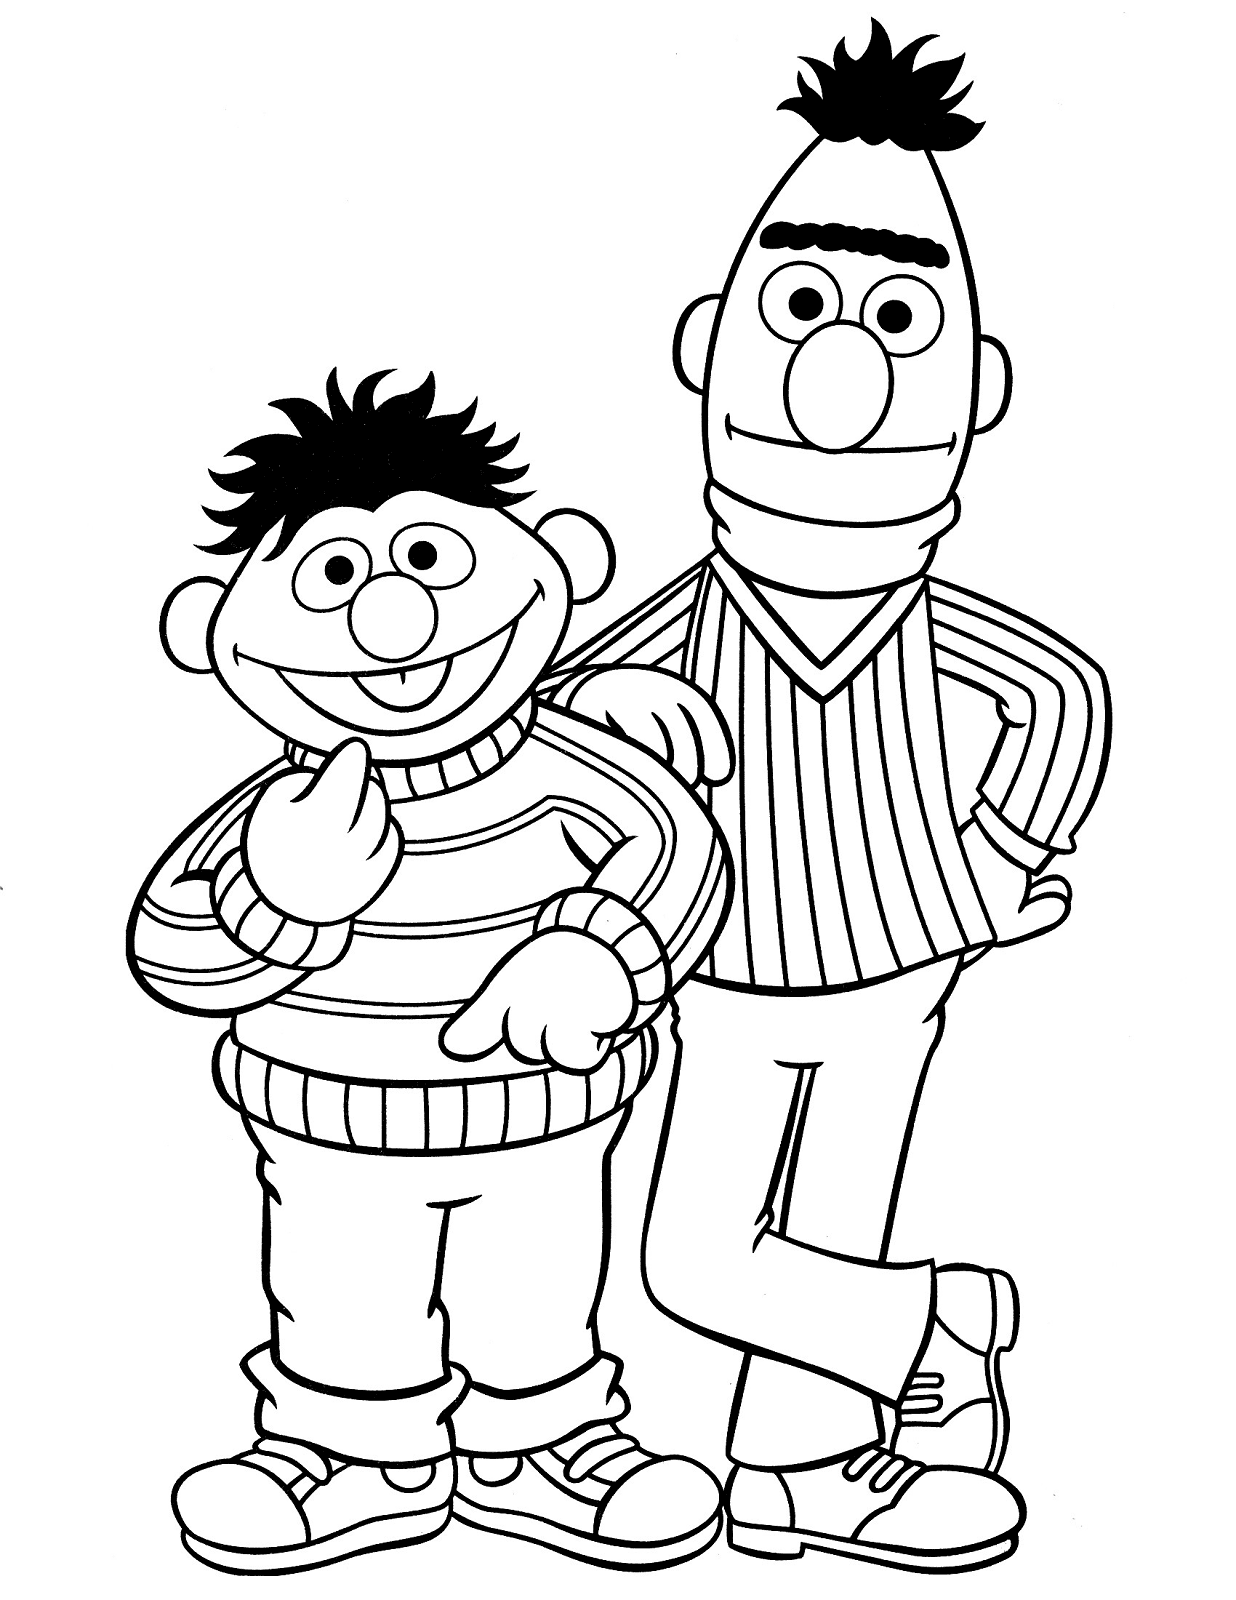 Sesame Street Bert and Ernie Coloring Pages